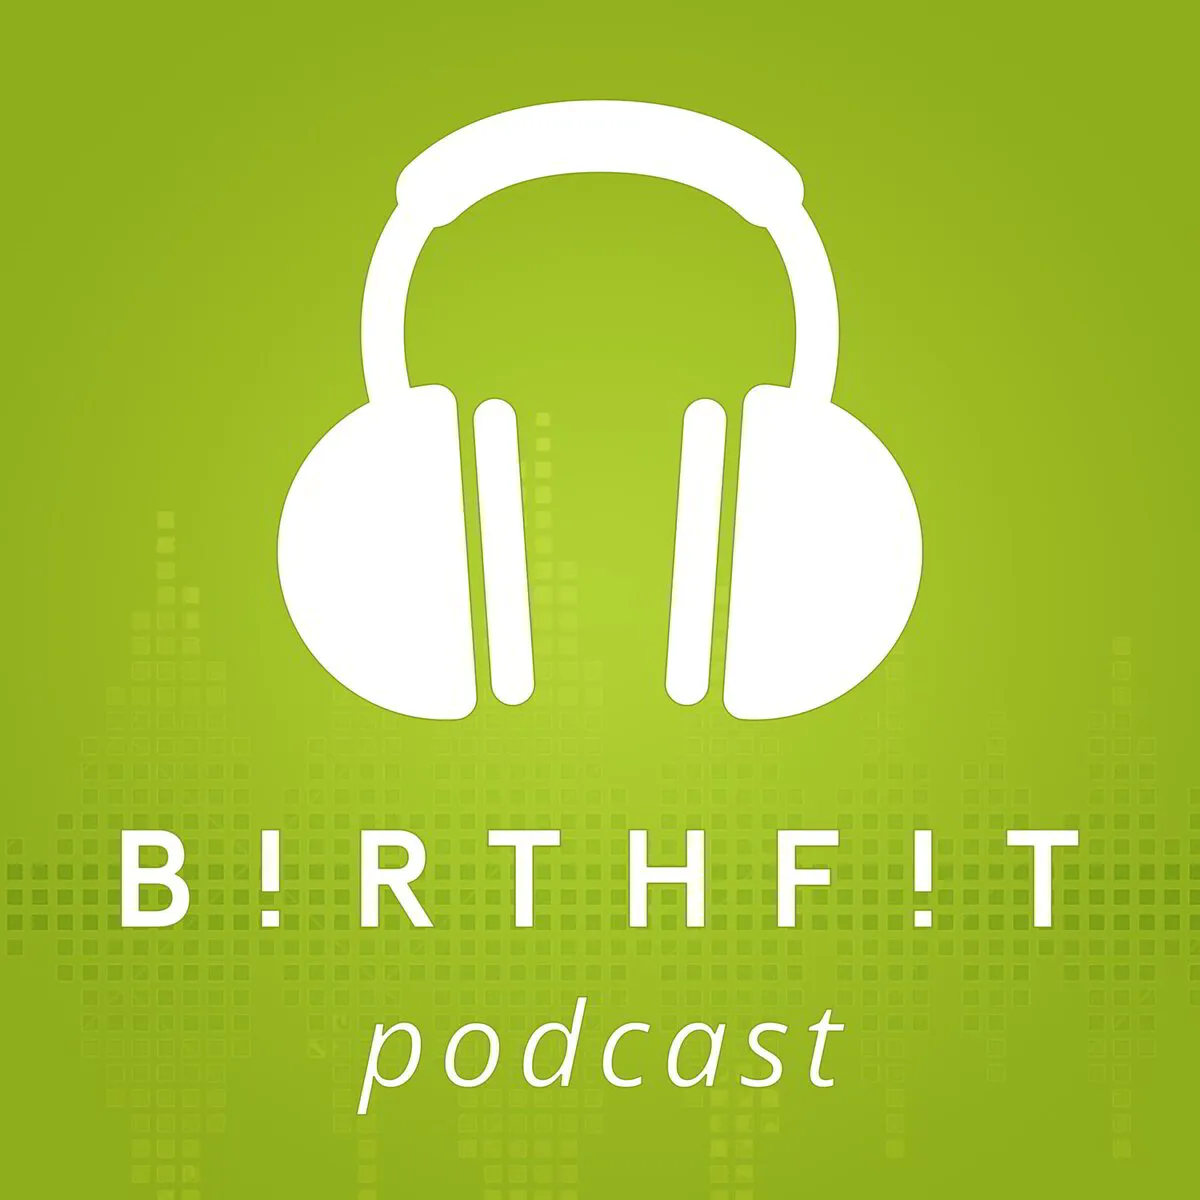 BIRTHFIT Podcast Episode 99 Featuring Cameron Sorsby, COO Praxis